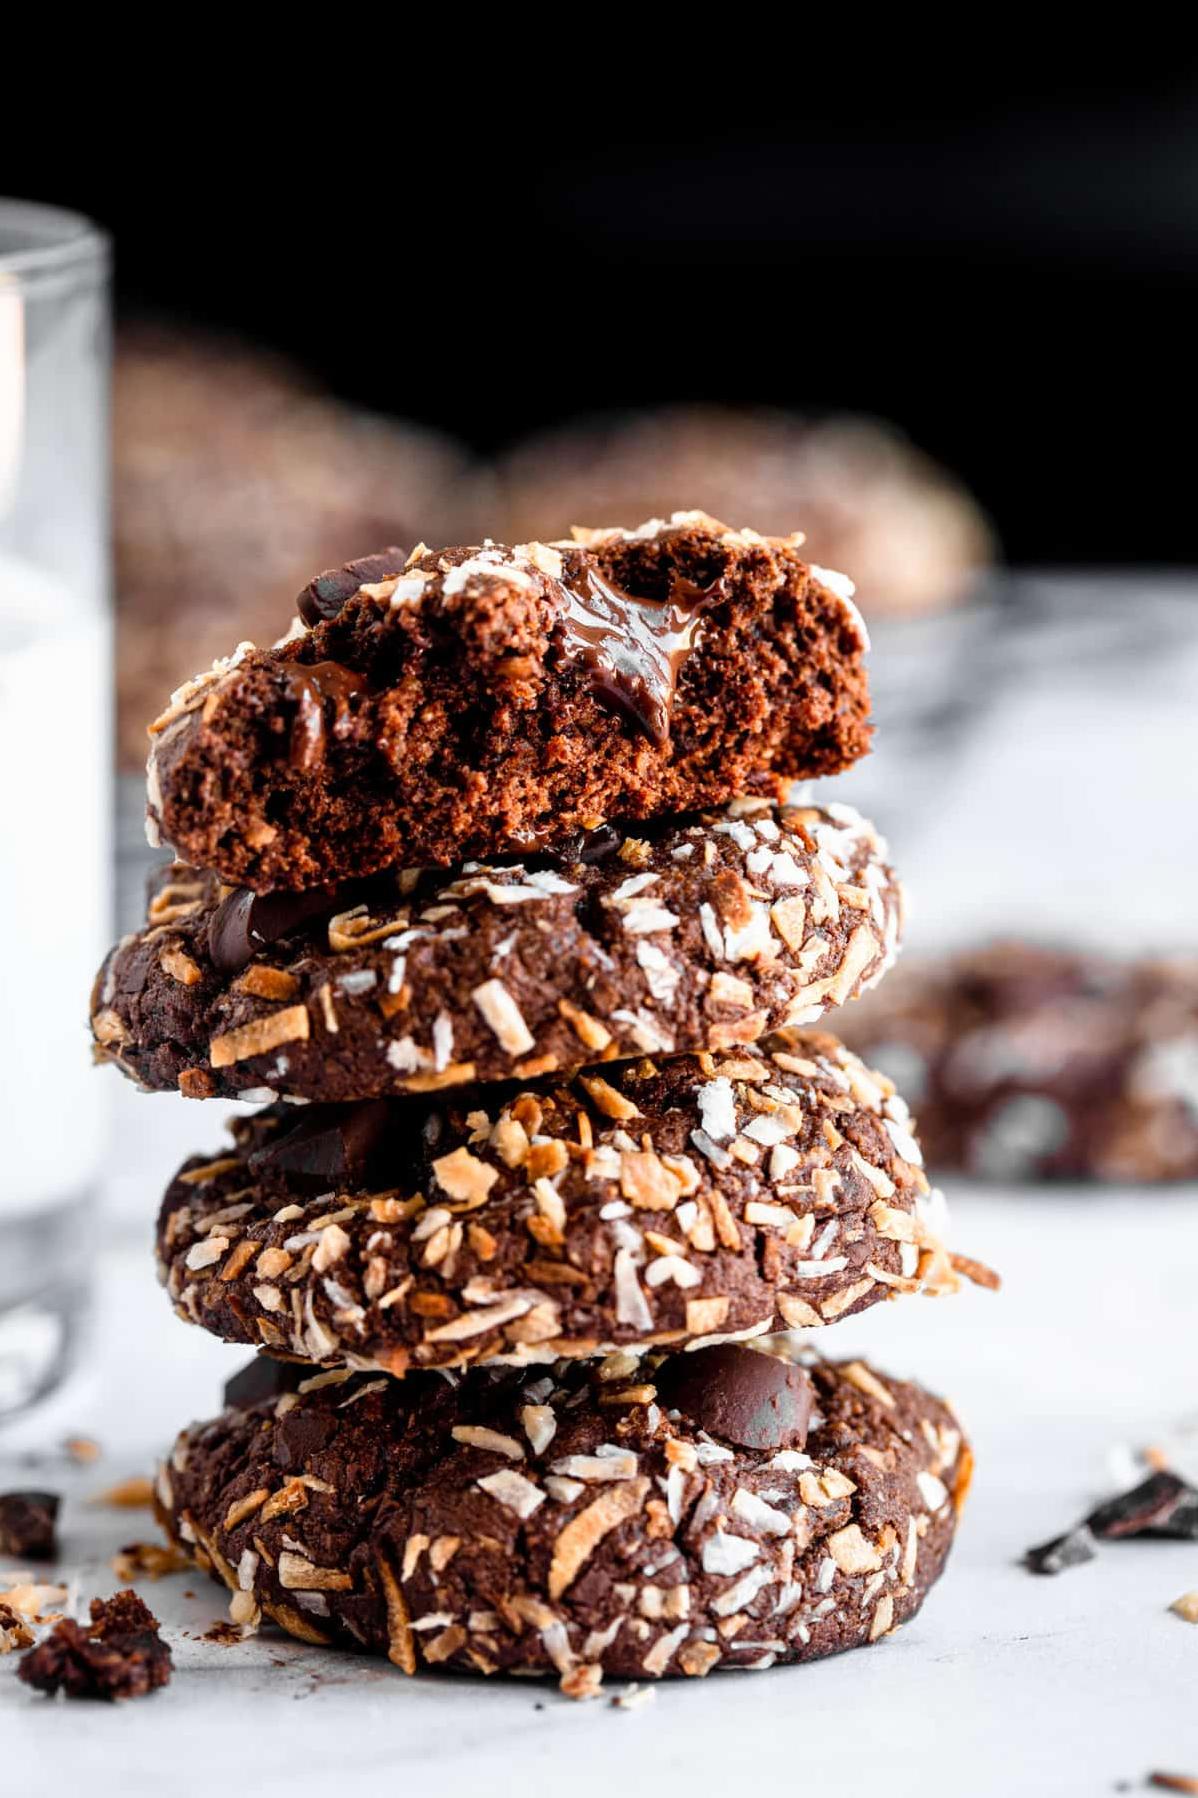  These gluten-free cookies are loaded with healthy ingredients like quinoa and almond butter